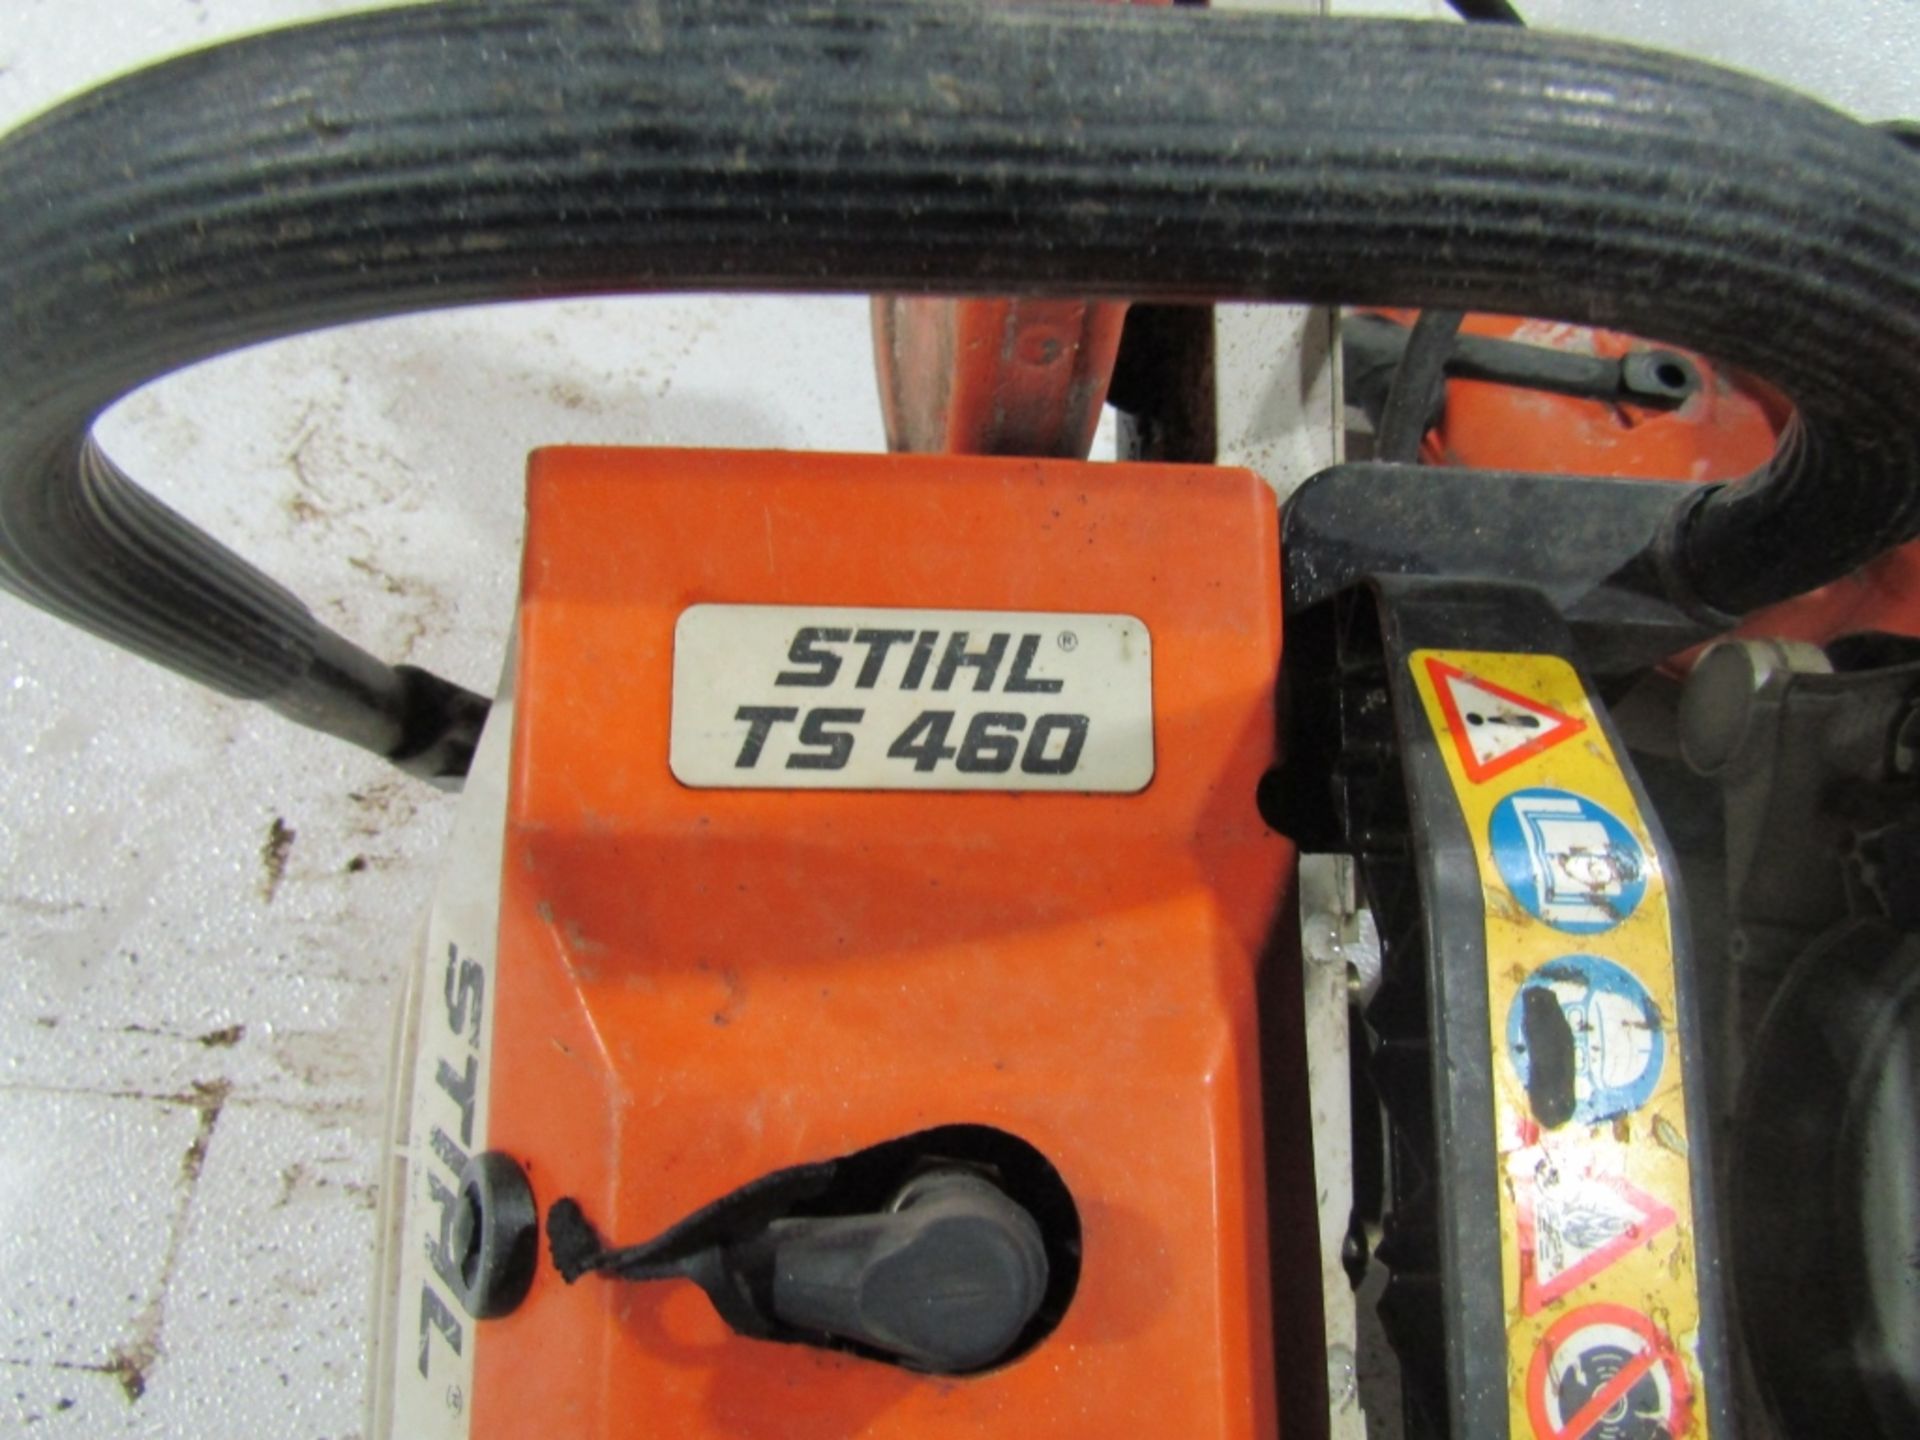 Parts only to 2 Stihl Concrete Saws, Located in Winterset, IA - Image 2 of 6